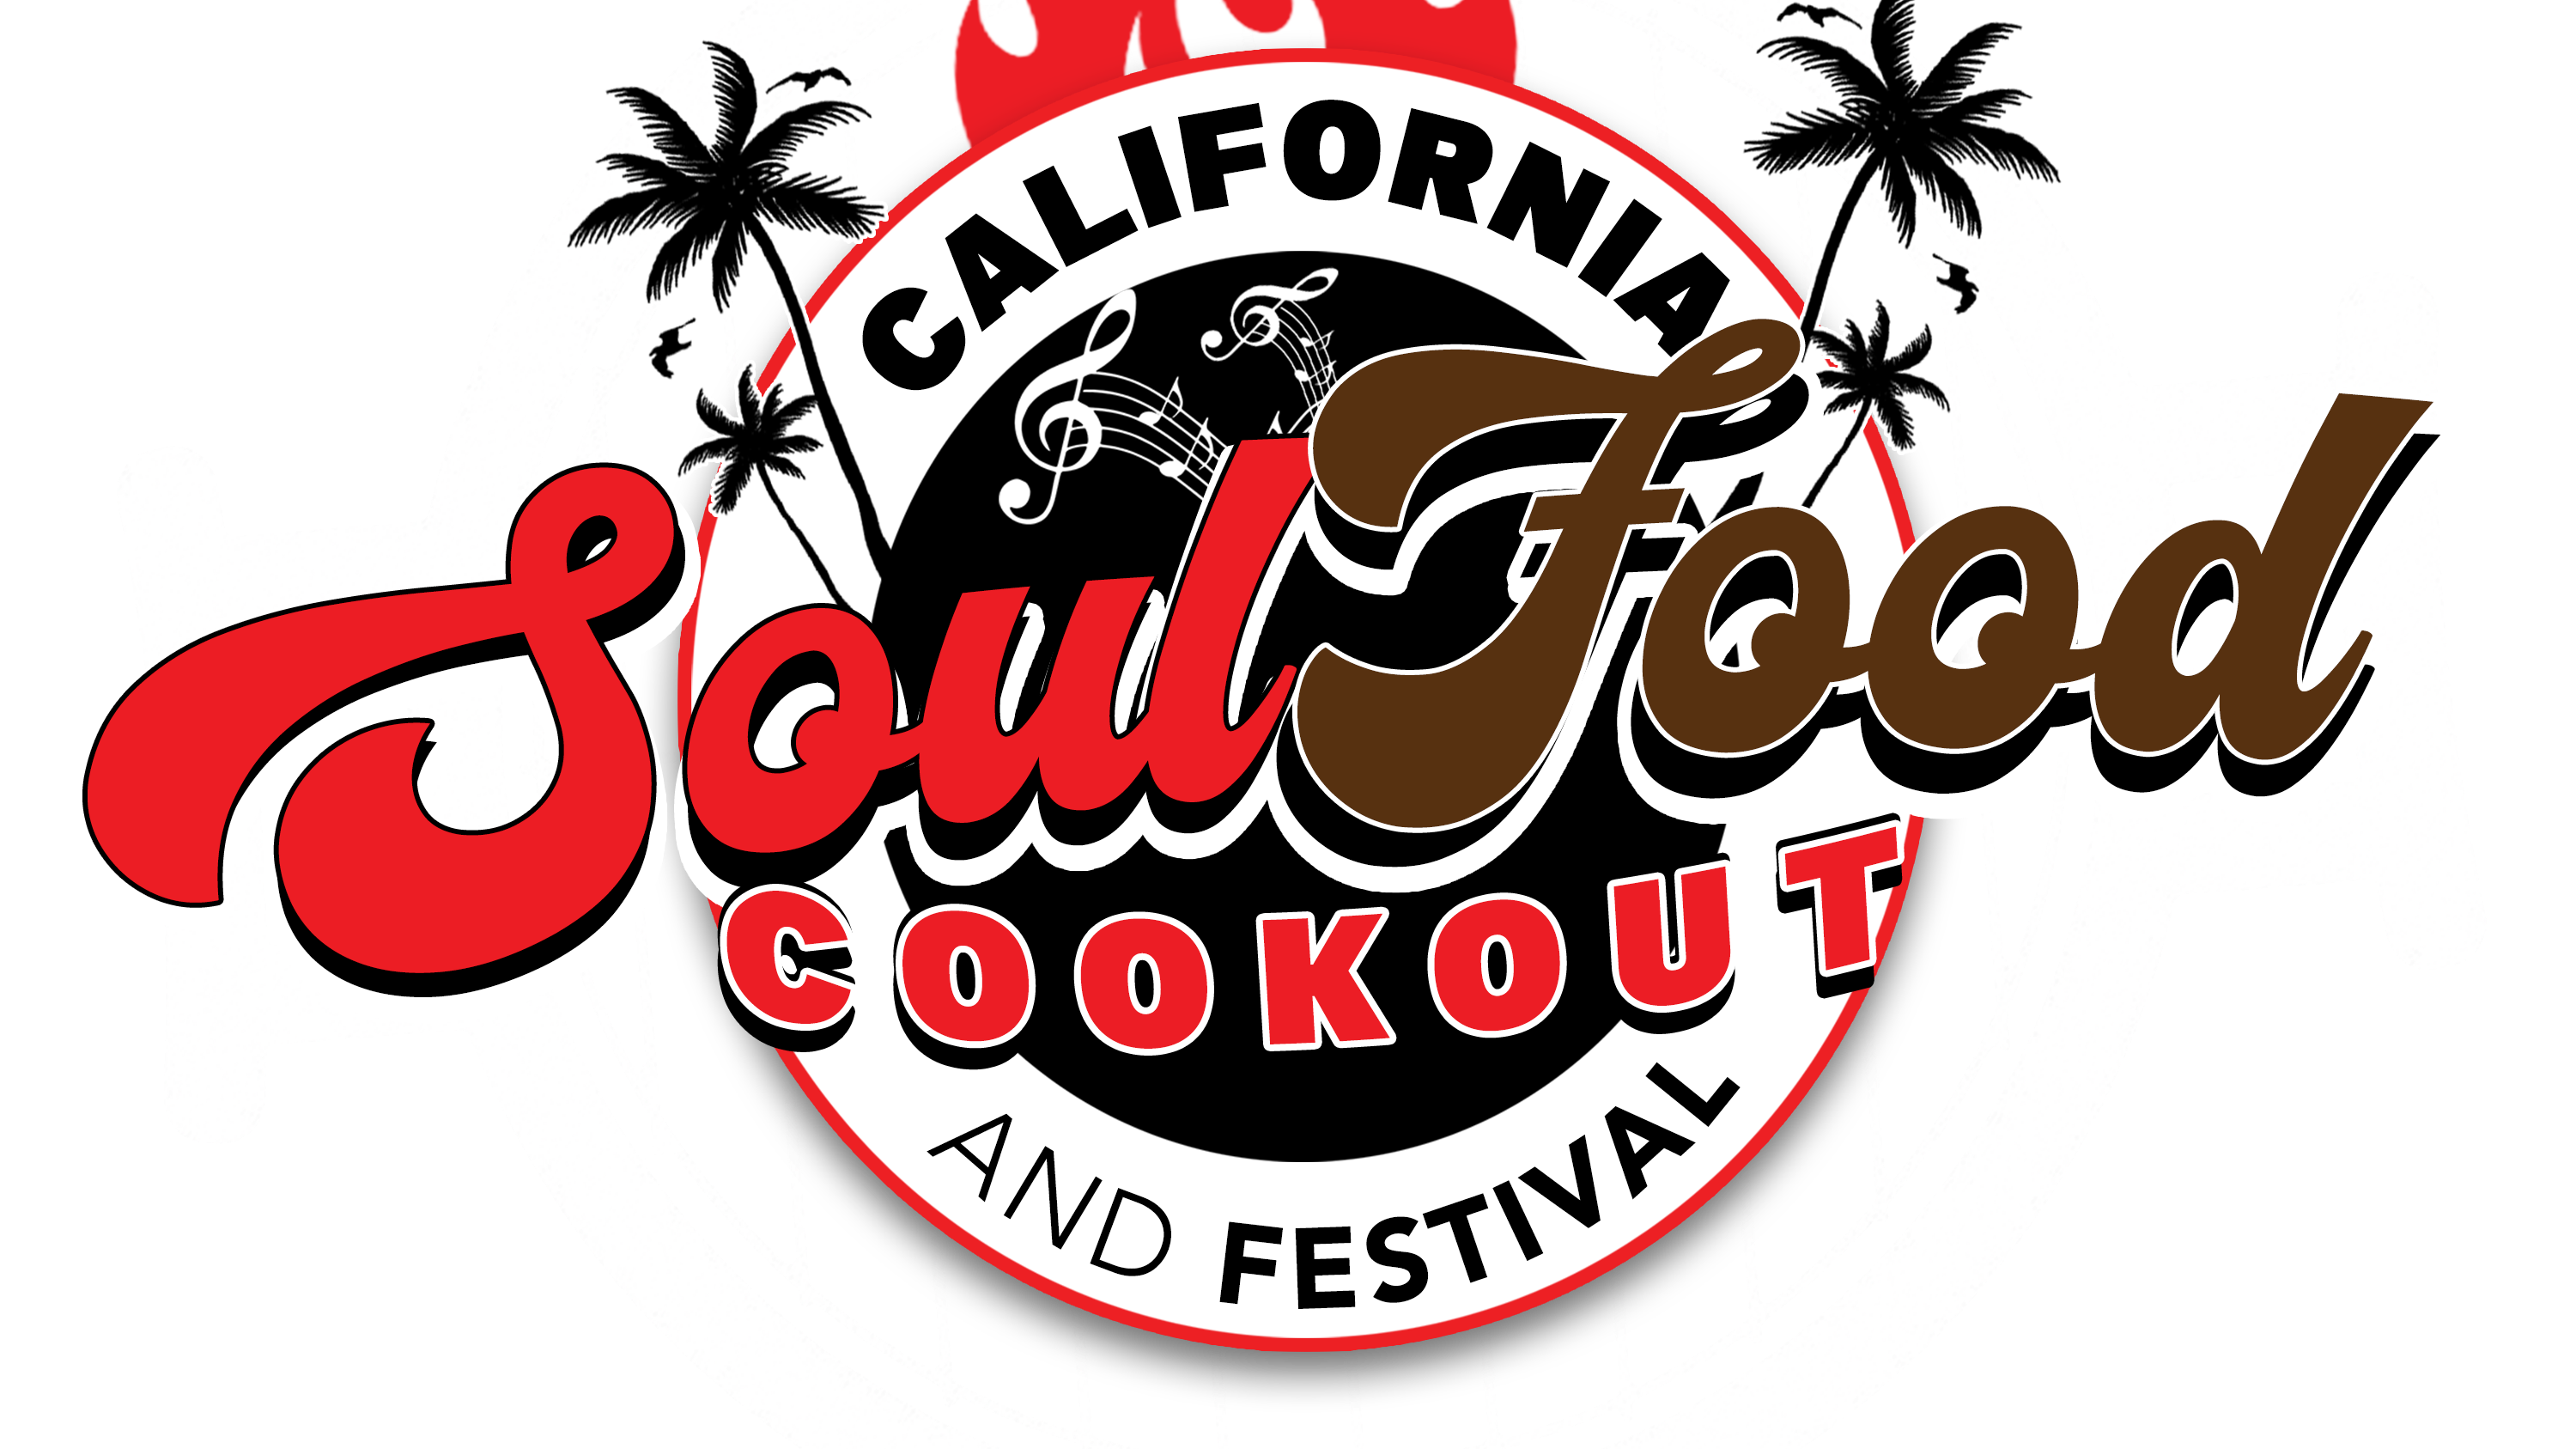 California Soul Food Cookout and Festival to Benefit Regional Charities 1